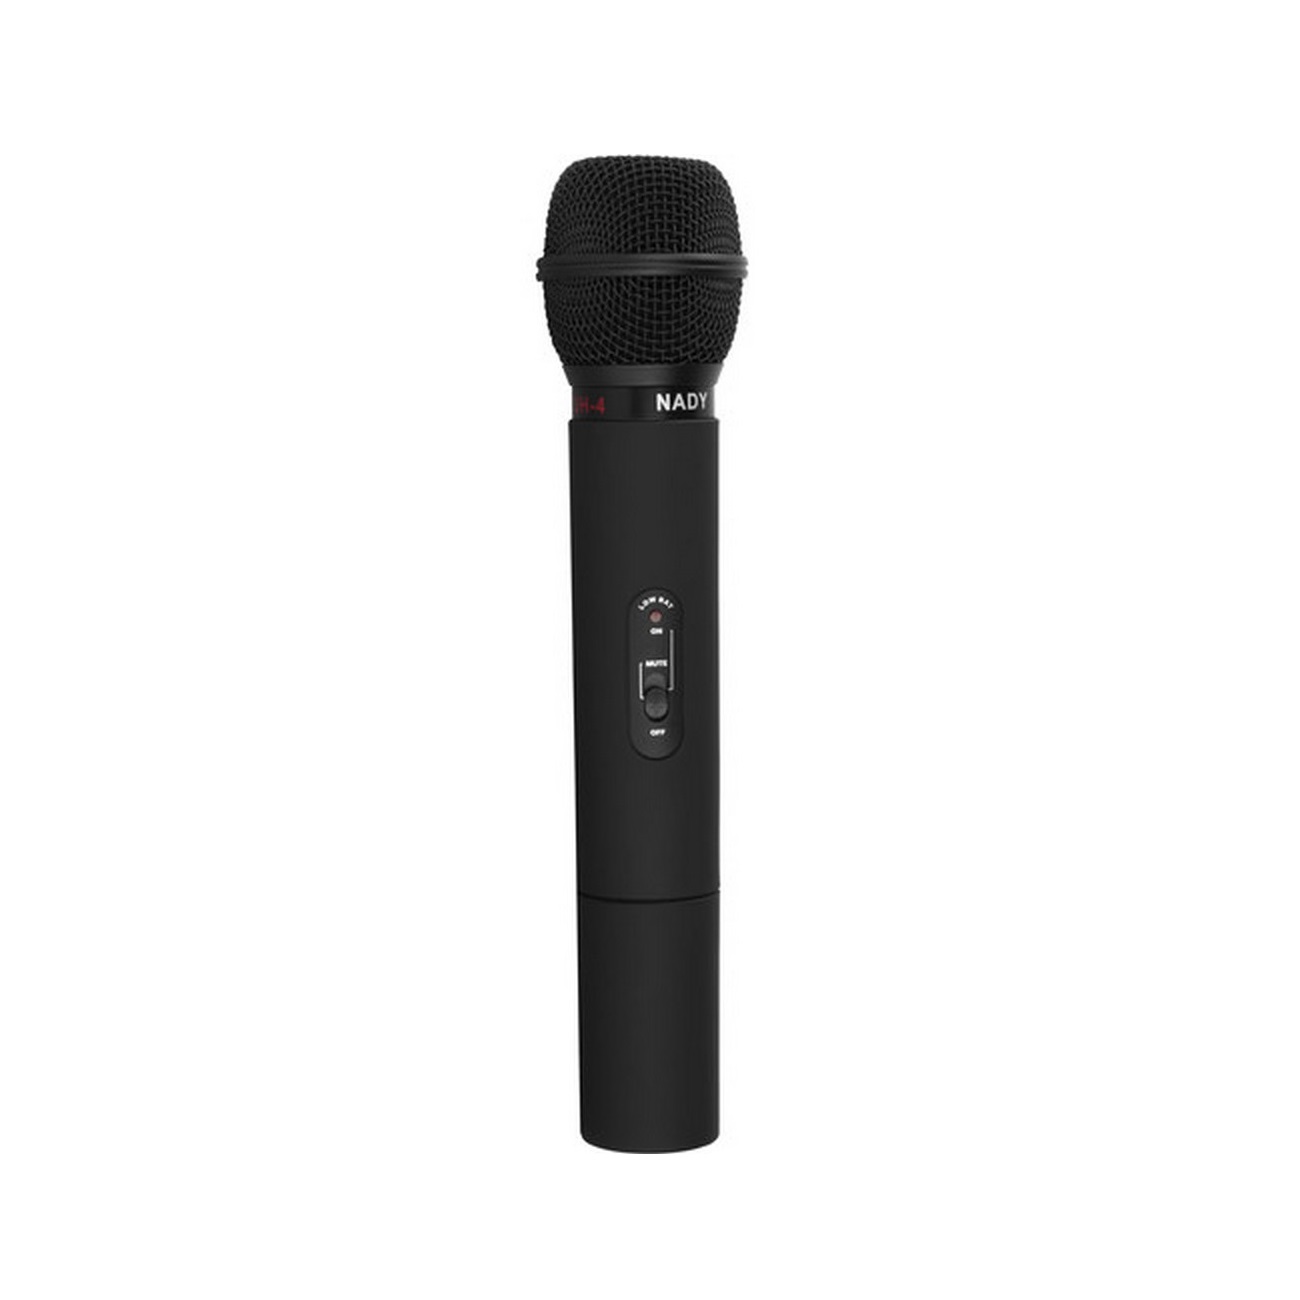 Nady UHF-4 HT/CH-11 Professional Handheld Wireless Microphone System